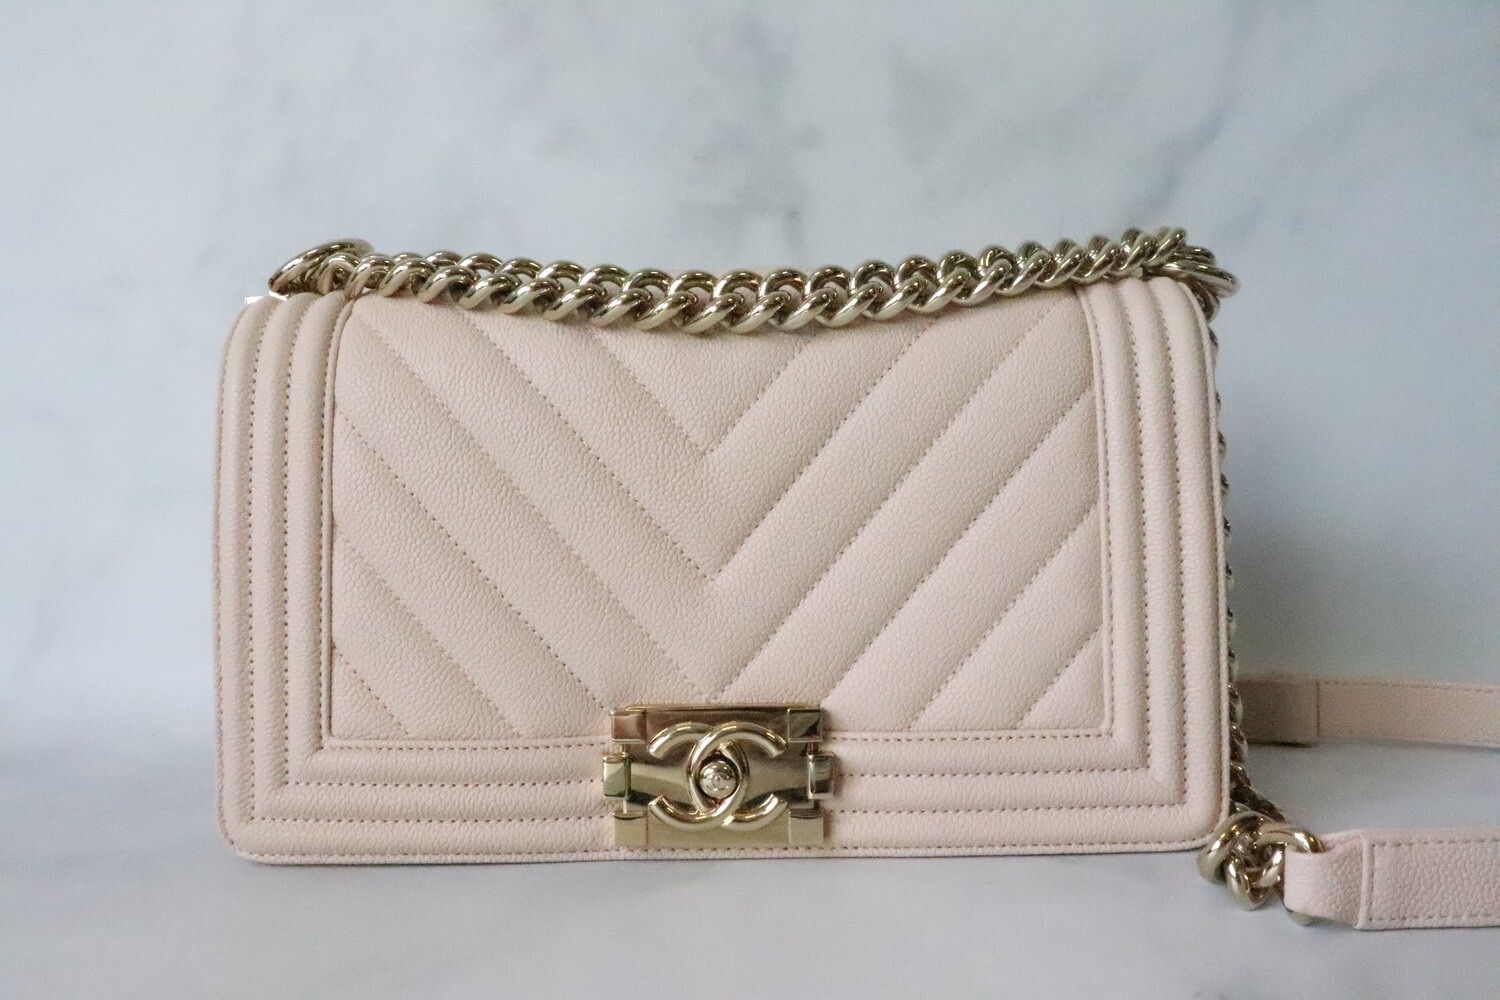 Chanel Boy Old Medium 17K Blush Nude Caviar Leather, Shiny Gold Hardware,  Preowned in Box